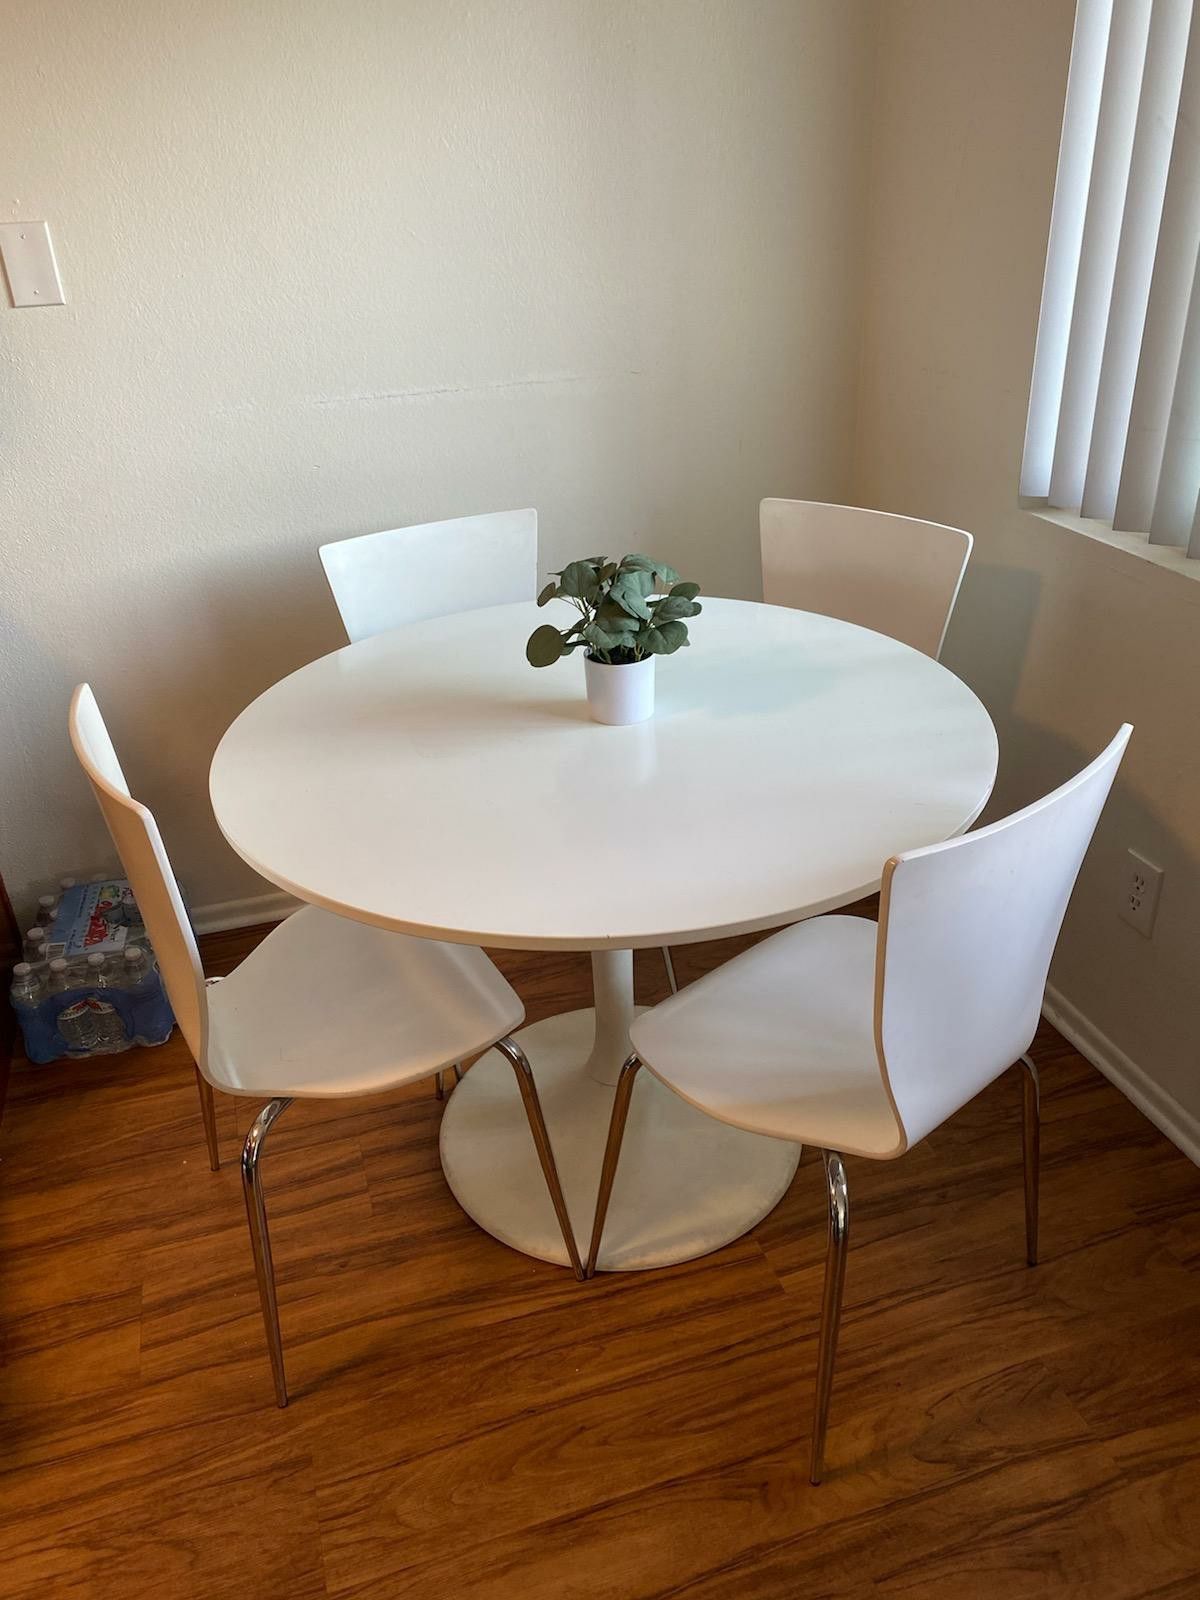 Kitchen Table w/4 chairs IKEA